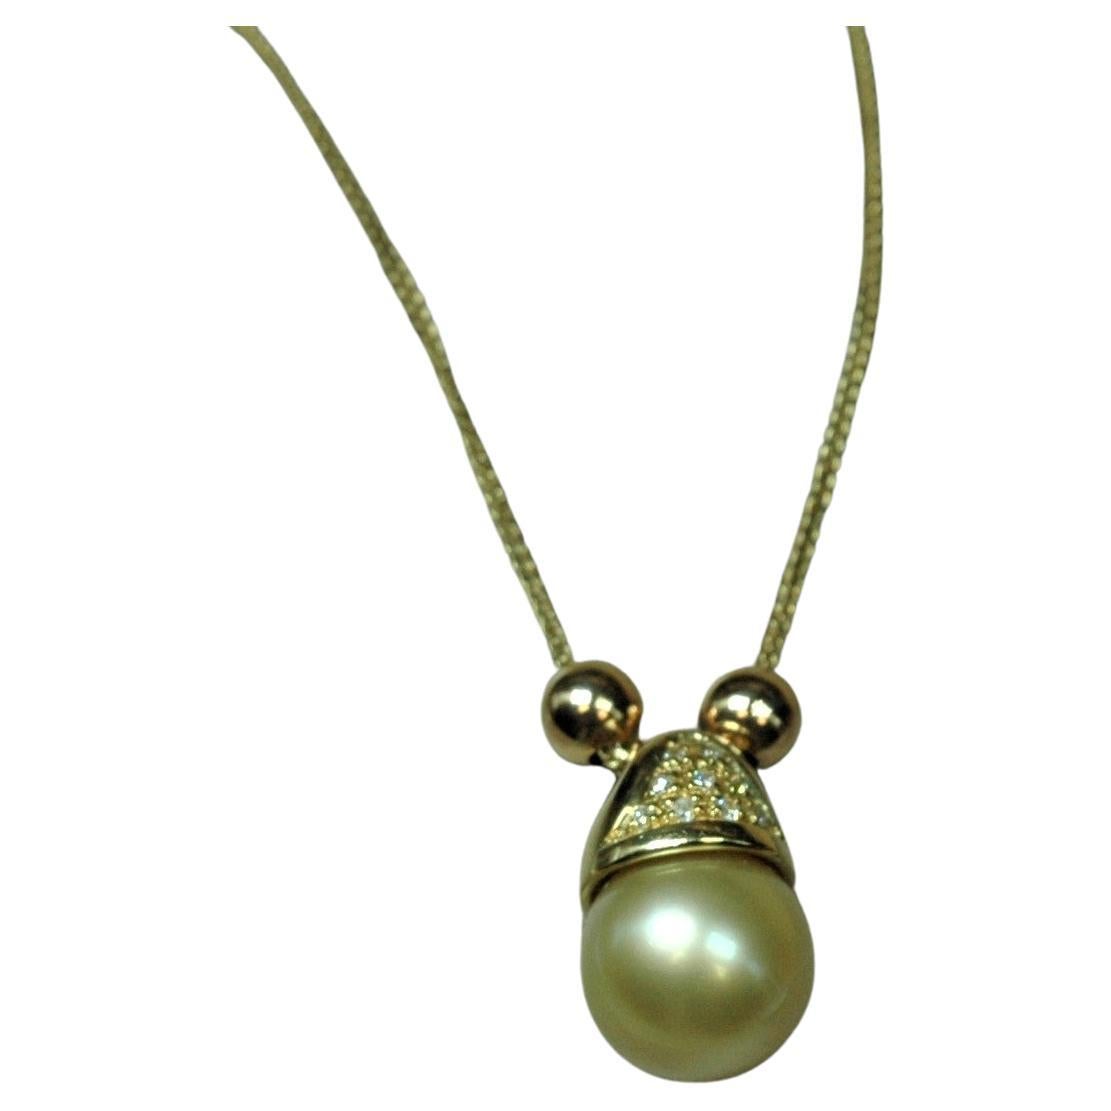 Very particular this 18 kt. yellow gold necklace with a gold pearl mounted with a rounded cotter pin and embellished with a small brilliants pave. The pendant slides smoothly on the chain accompanied laterally by two small spheres in yellow gold.